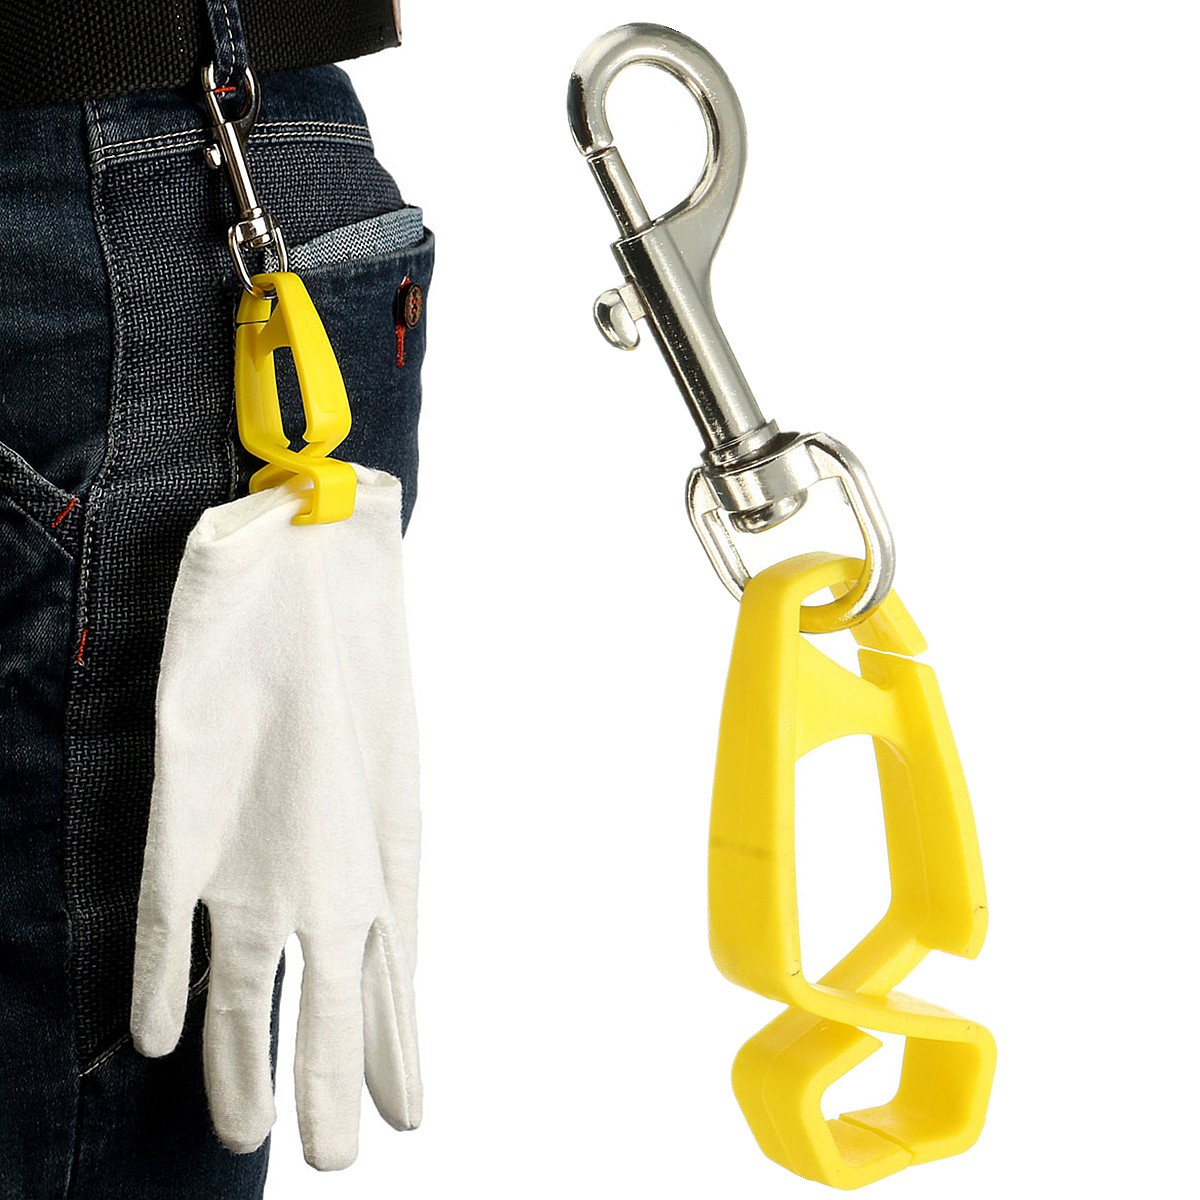 AT02 WORK GLOVE CLIPS CLAMP HOLDER GRABBER SAFETY ATTACH GLOVES TOWEL CORD GLASS 